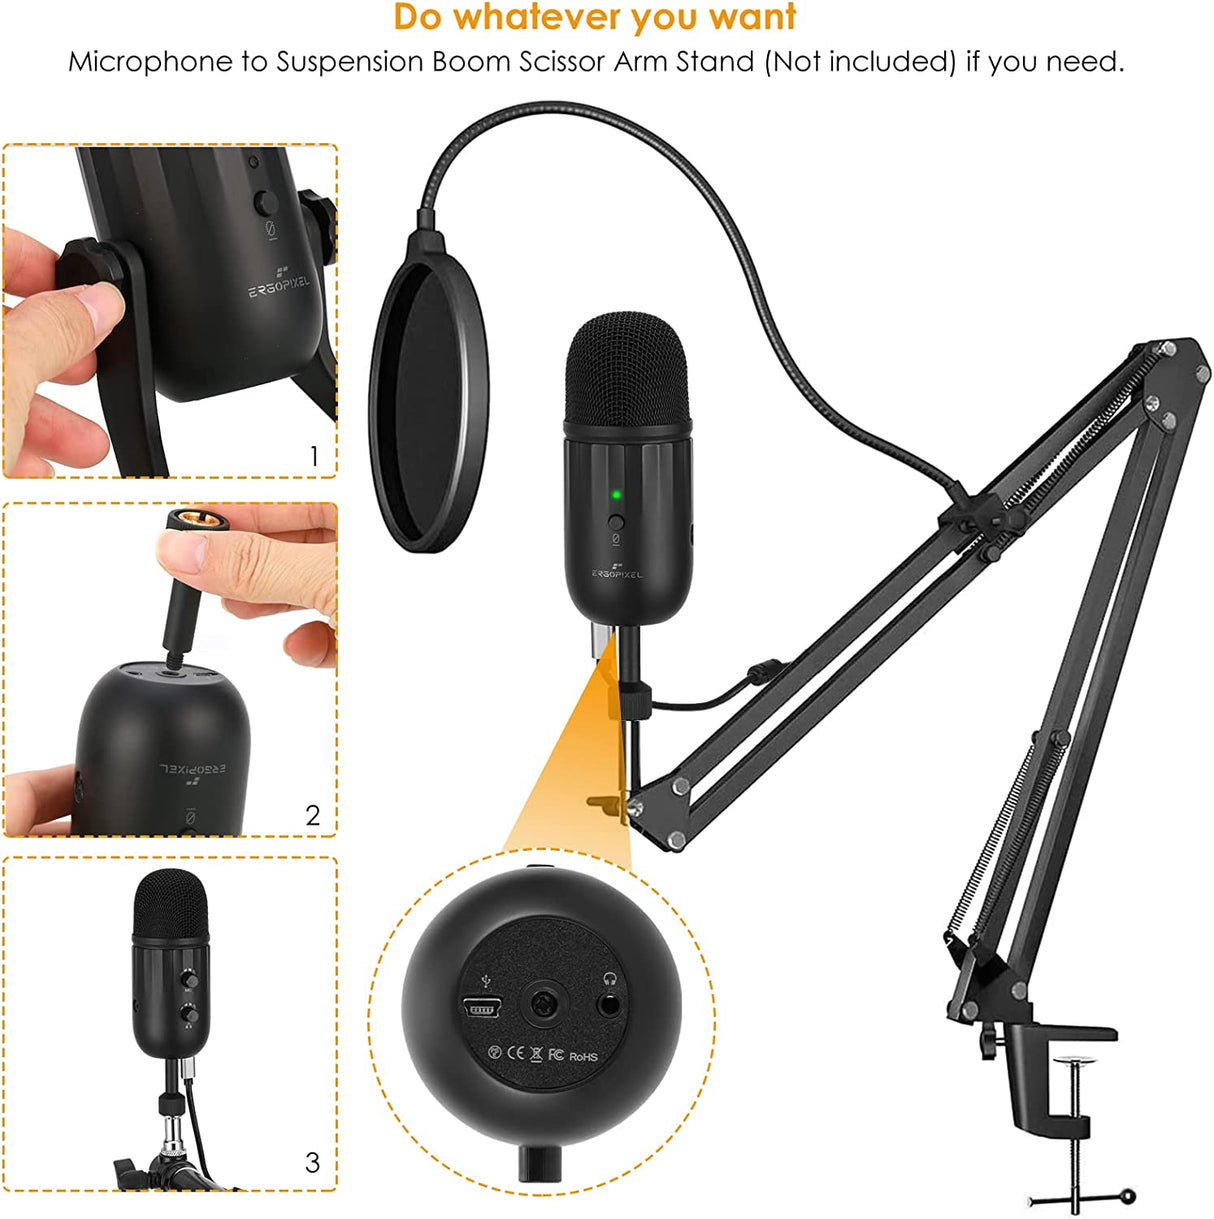 Ergopixel USB Microphone for PC, Mac, Gaming, Streaming, Podcasting, Studio with A Live Monitoring, Gain Controls, A Mute Button for Podcasting, Plug and Play – Blackout